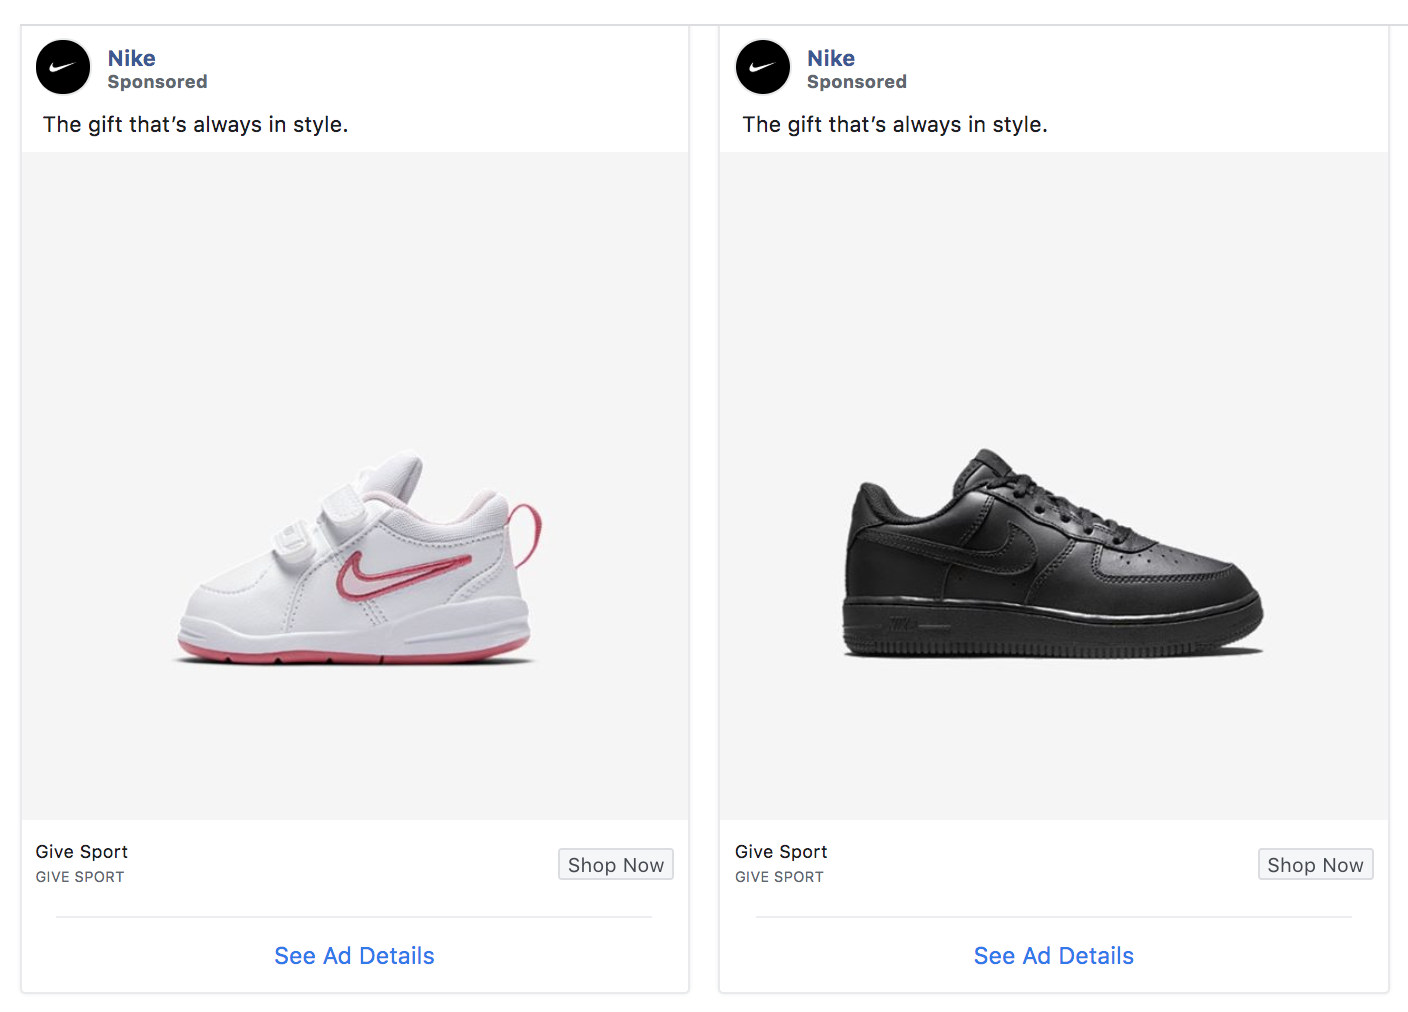 Nike Ads: Learn Their for Driving Sales — Relevantly Facebook Marketing